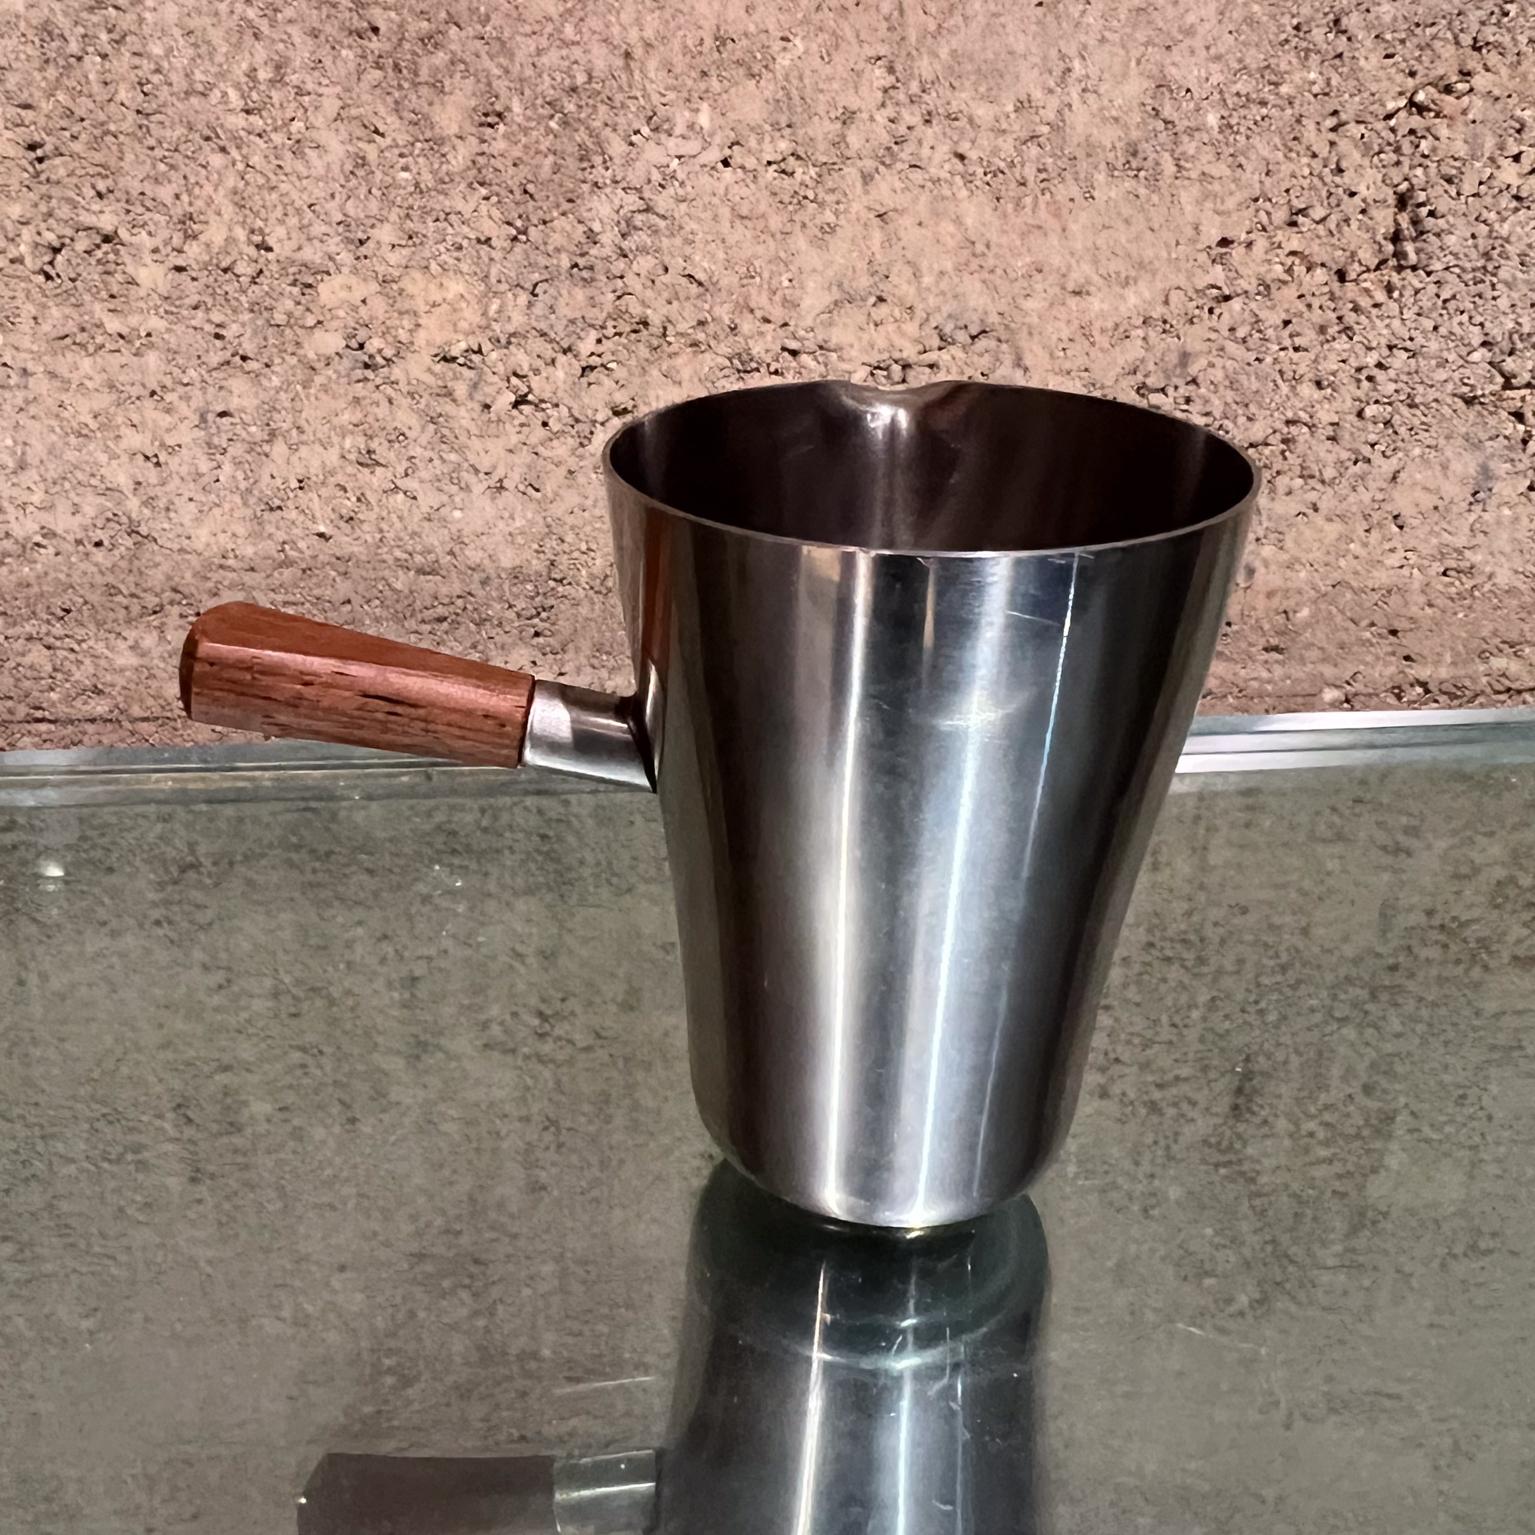 AMBIANIC presents
NMT Stainless Espresso Mini Pitcher Creamer Denmark
3.25 h x 4.25 w x 2.63 d
Stainless Steel and Teak
Preowned vintage condition
See all images.